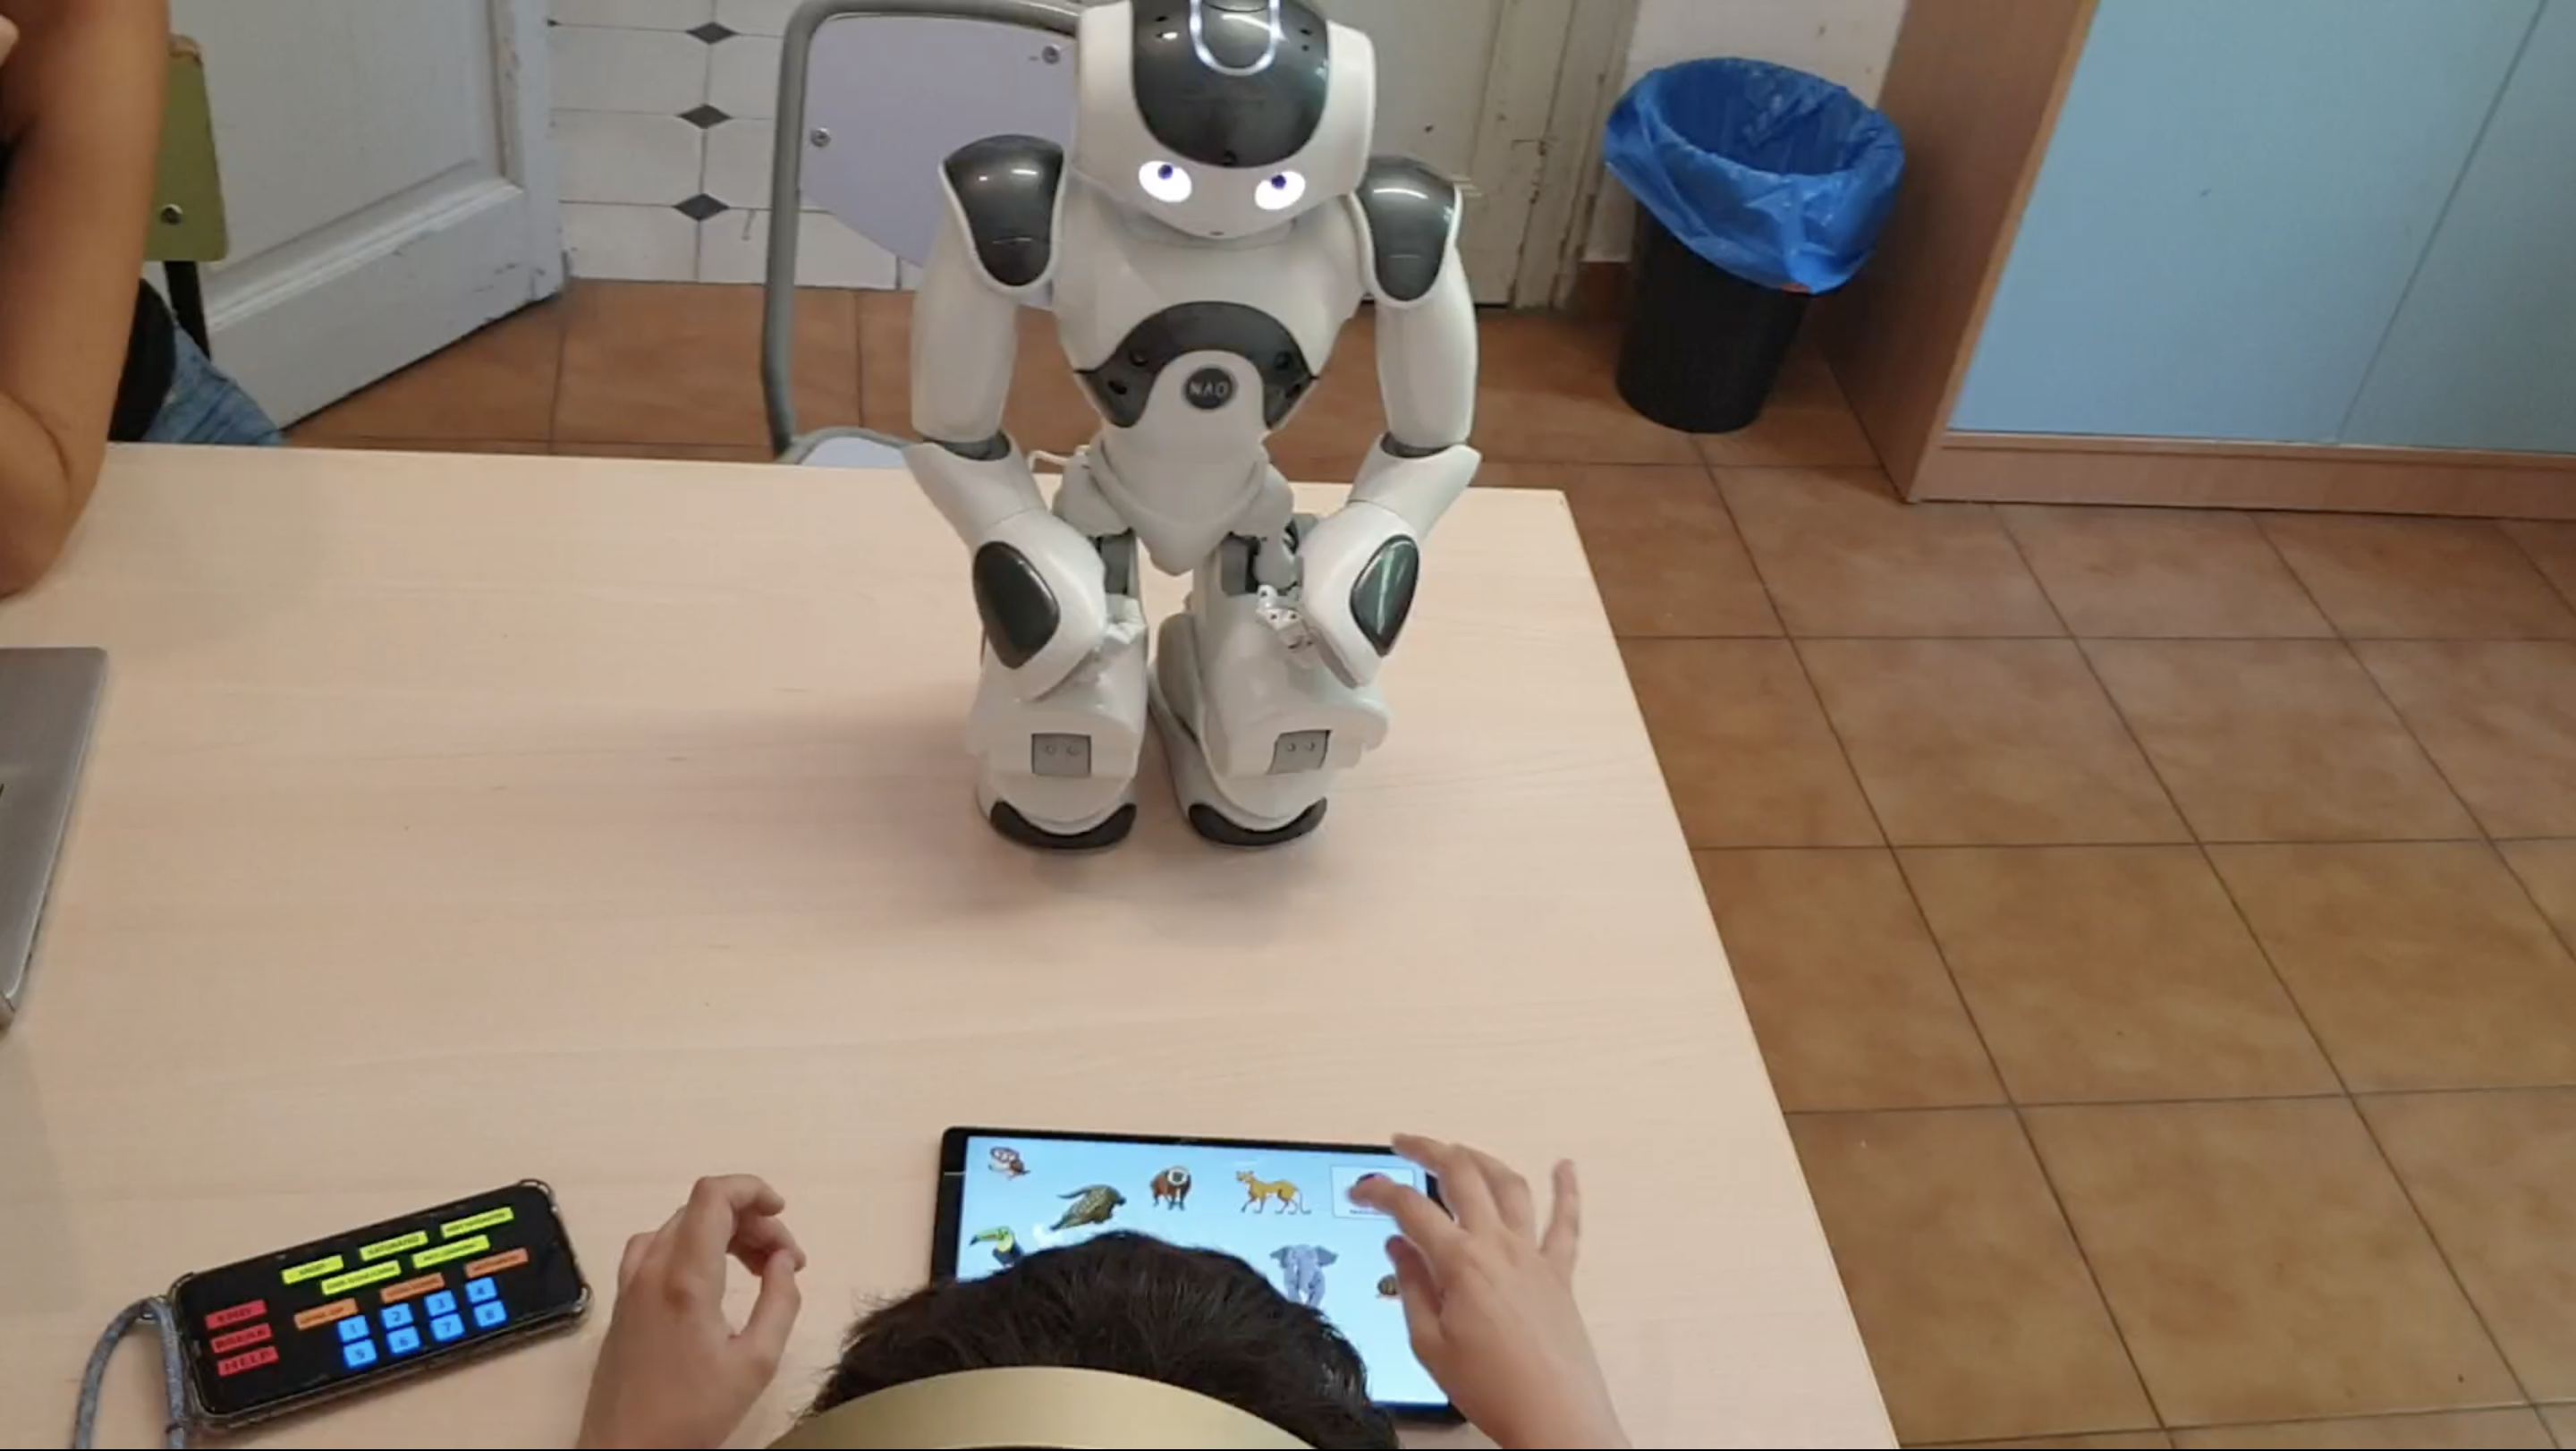 The robot is called Nao and they work with it, among other things, attention.